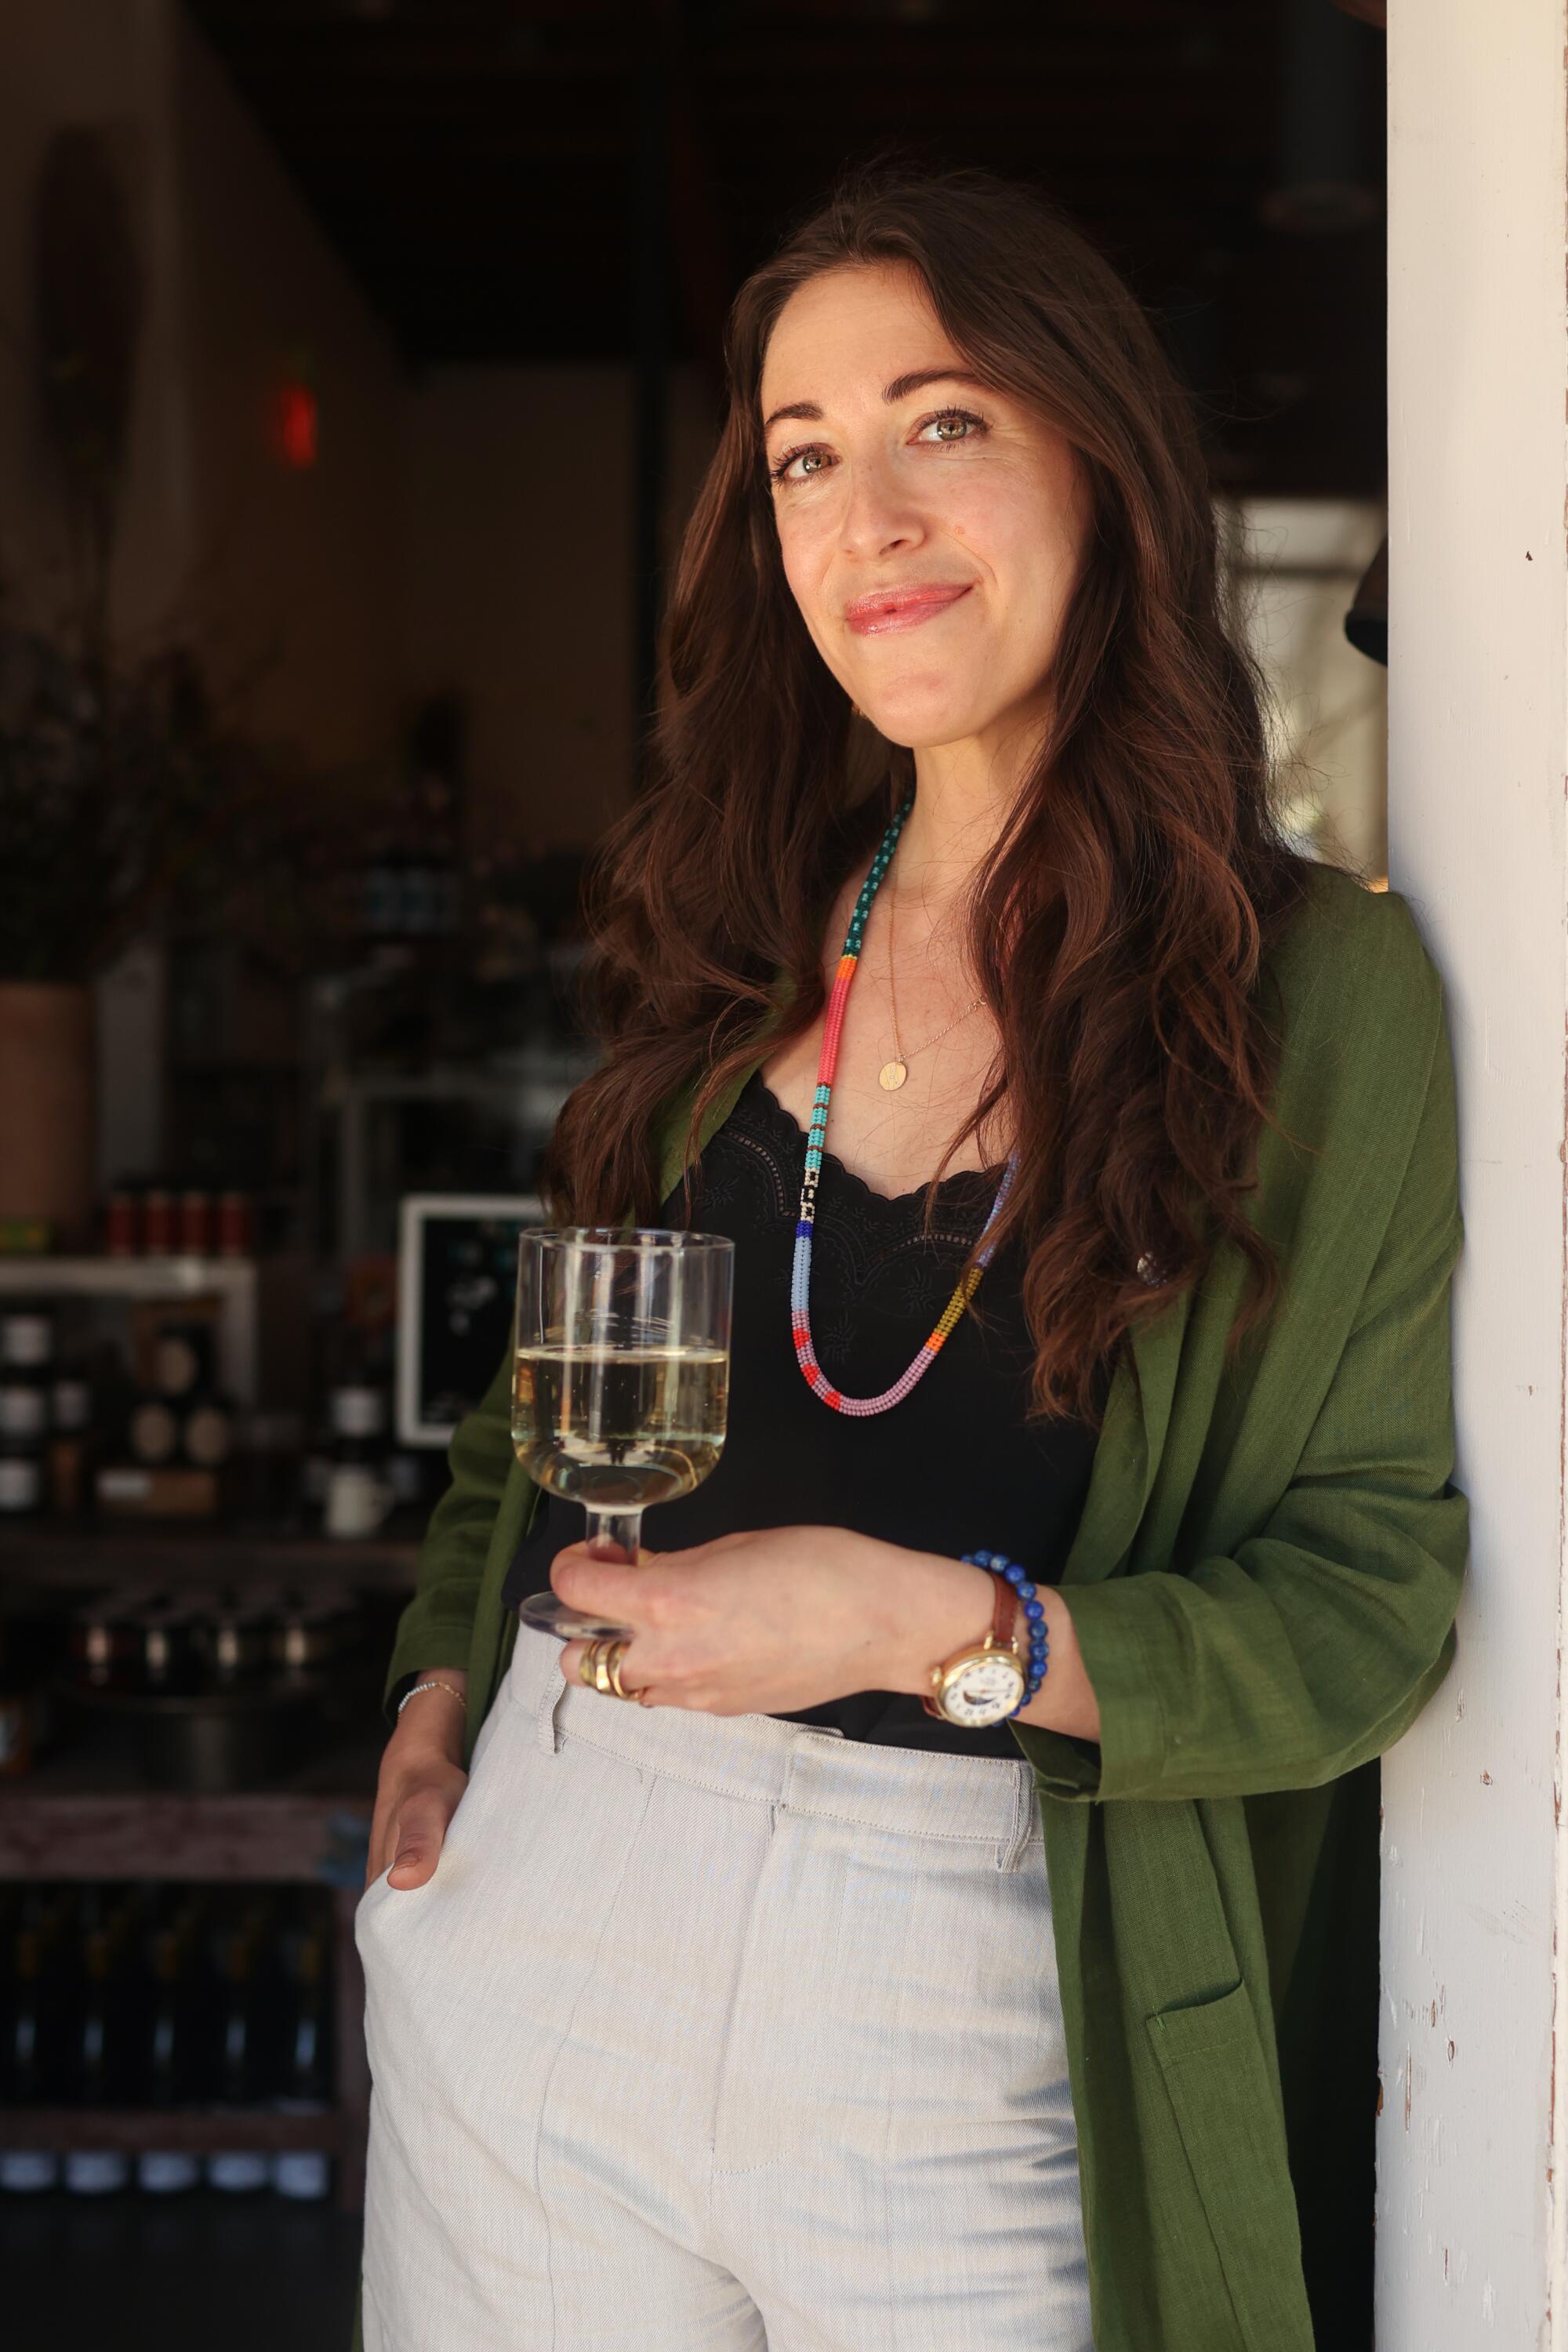 Botanica co-owner Heather Sperling lean against a wall, holding a glass of wine, at her restaurant